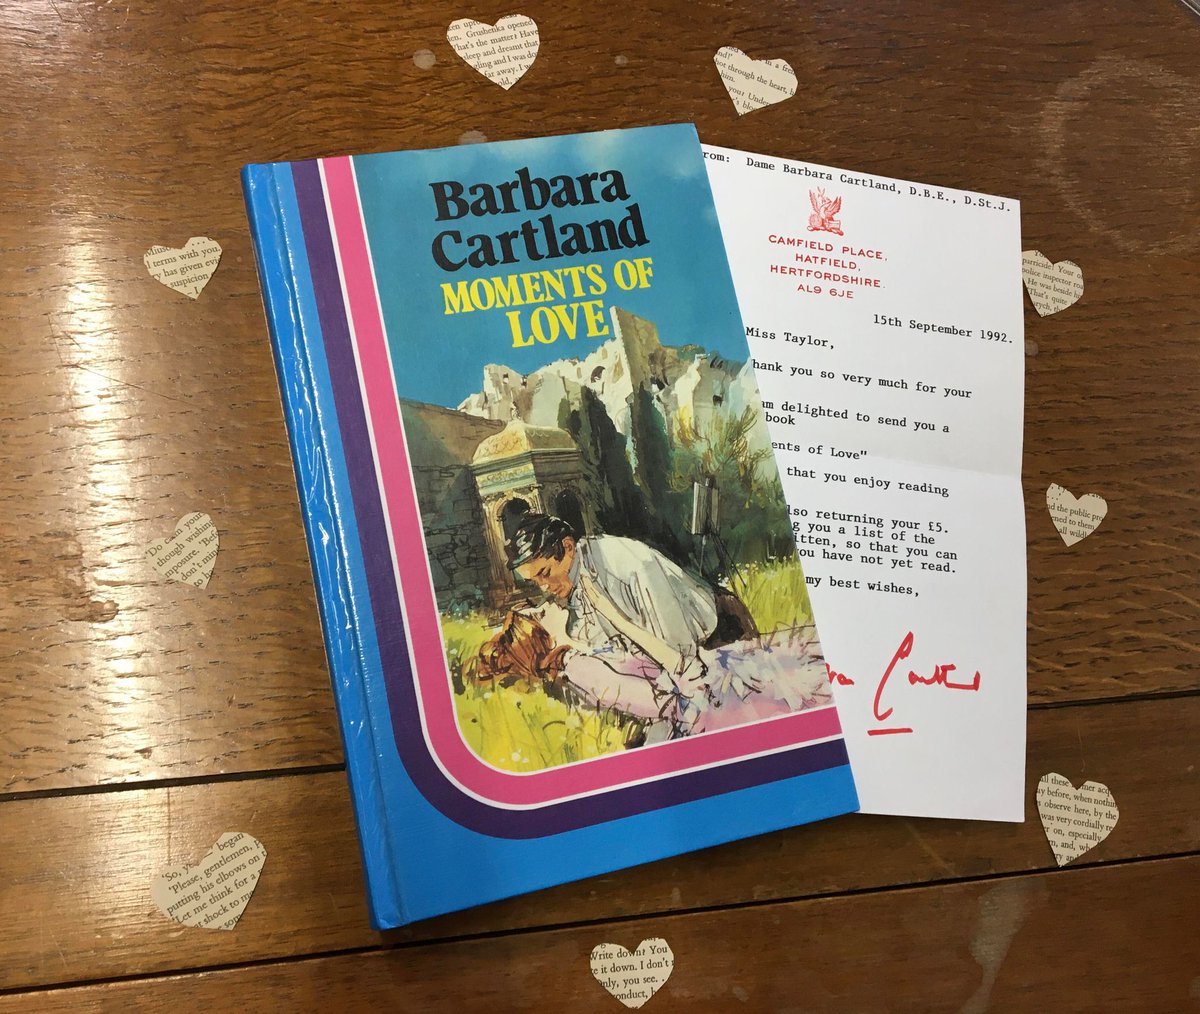 It's Valentines Day tomorrow ❤️ Here's the PERFECT gift from the Queen of Romance herself...a signed copy of Barbara Cartland's Moments of Love, including a letter to a fan...sexy large print edition! Also, here's an array of books on love from fiction to memoir to to essays.. ❤️